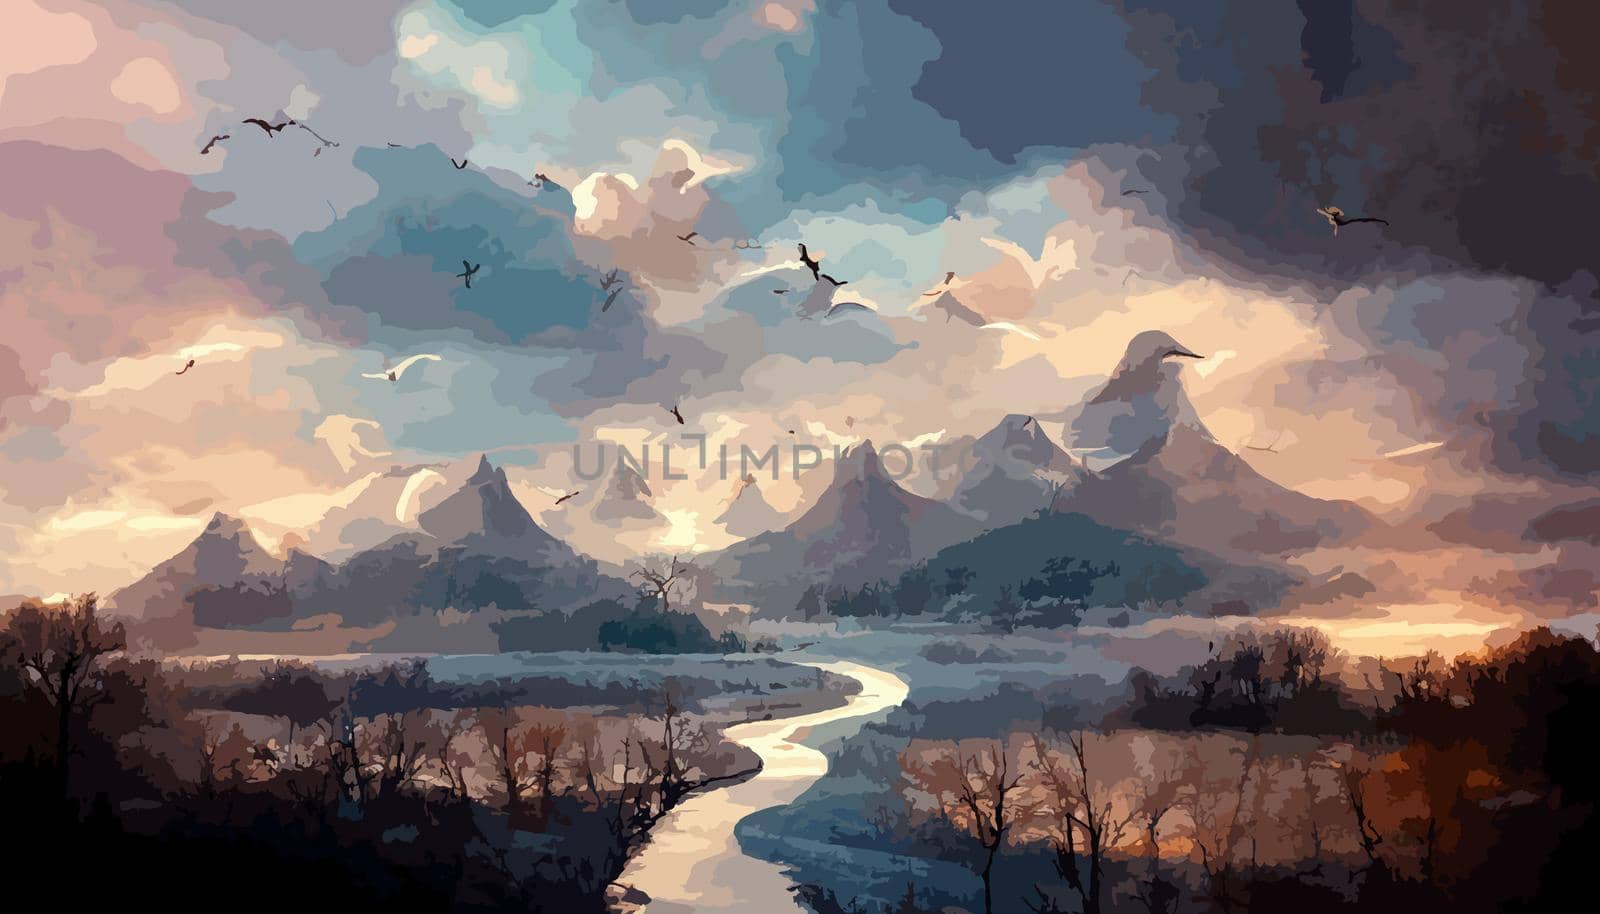 birds flying over rivers and mountains wallpaper illustration. illustration for wallpaper.